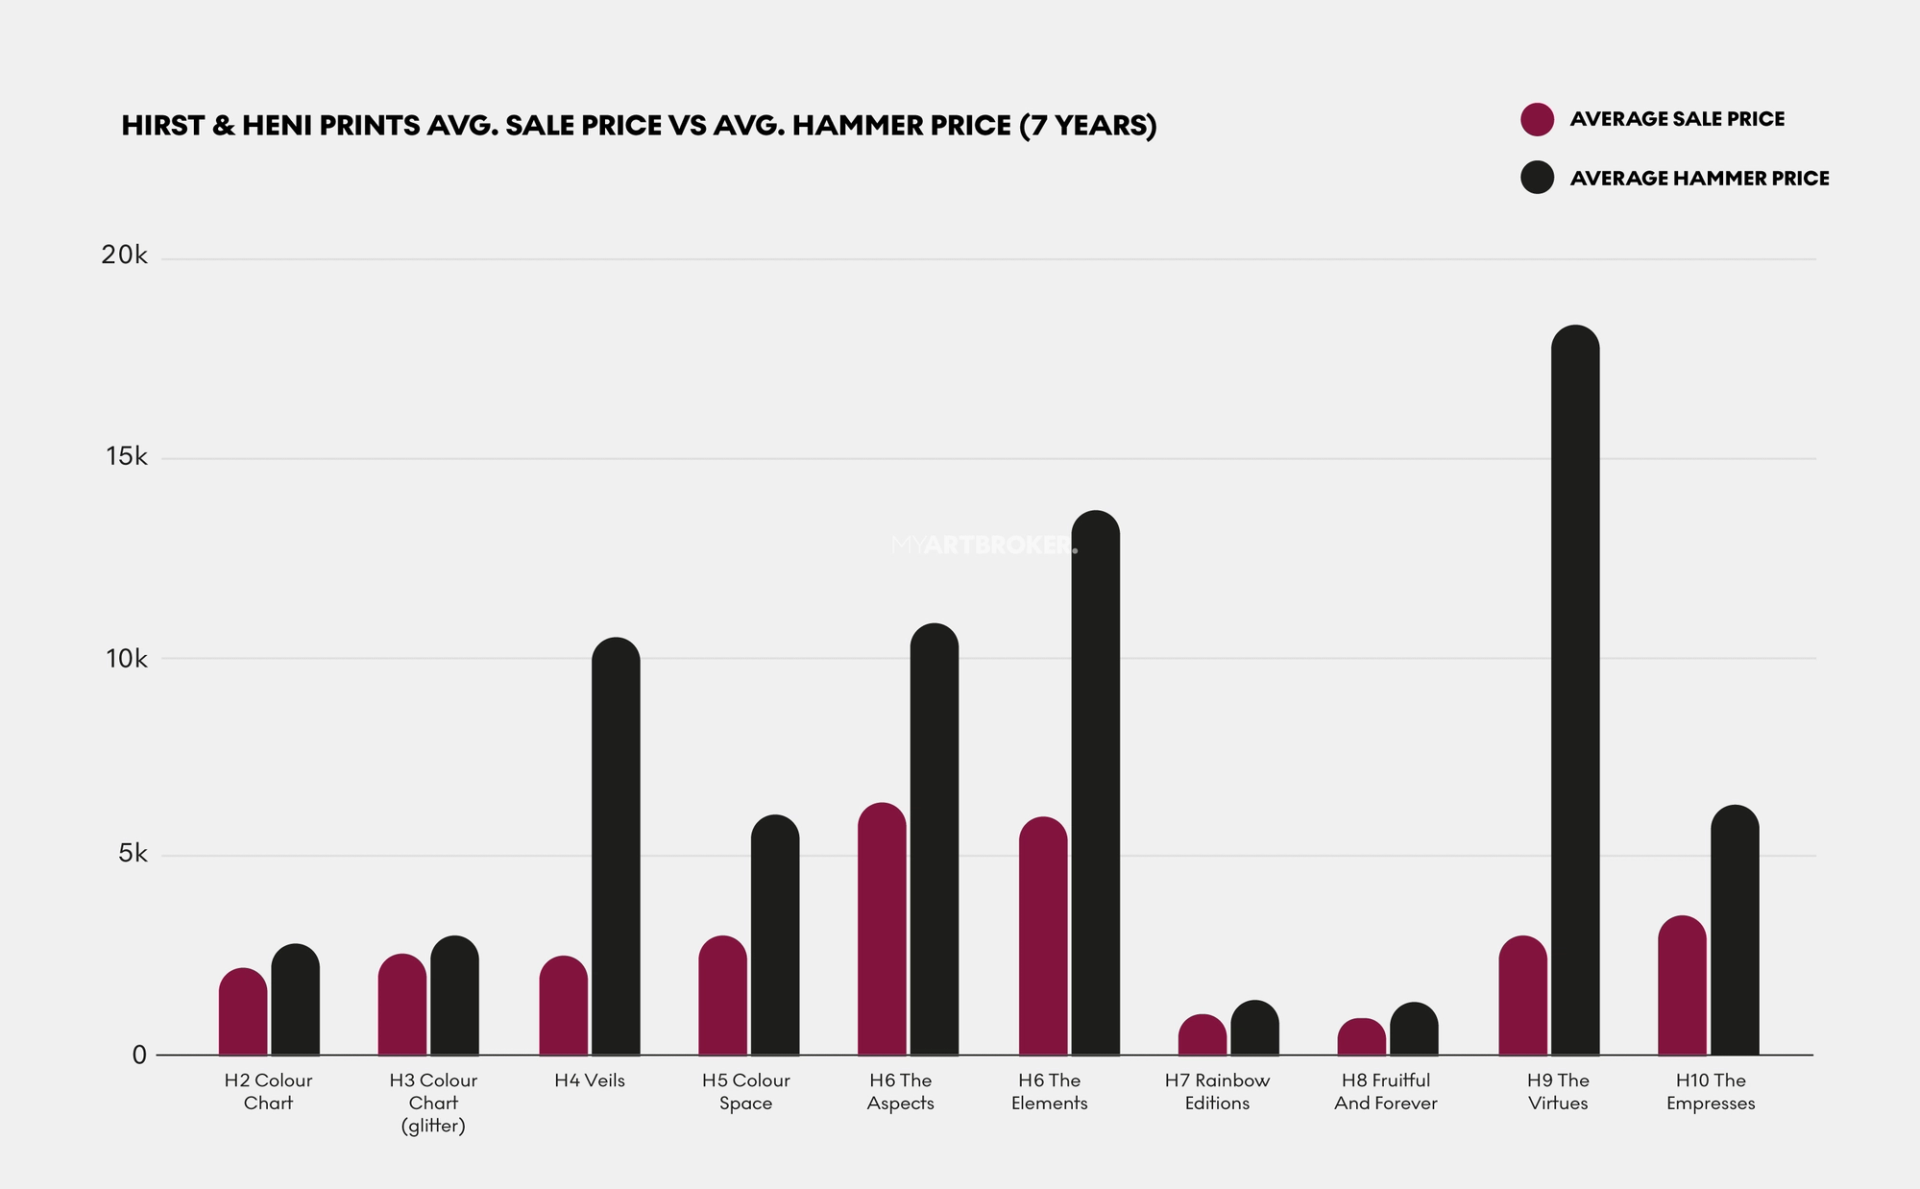 Bar graph showing Hirst & HENI's average sale price vs average hammer price over seven years